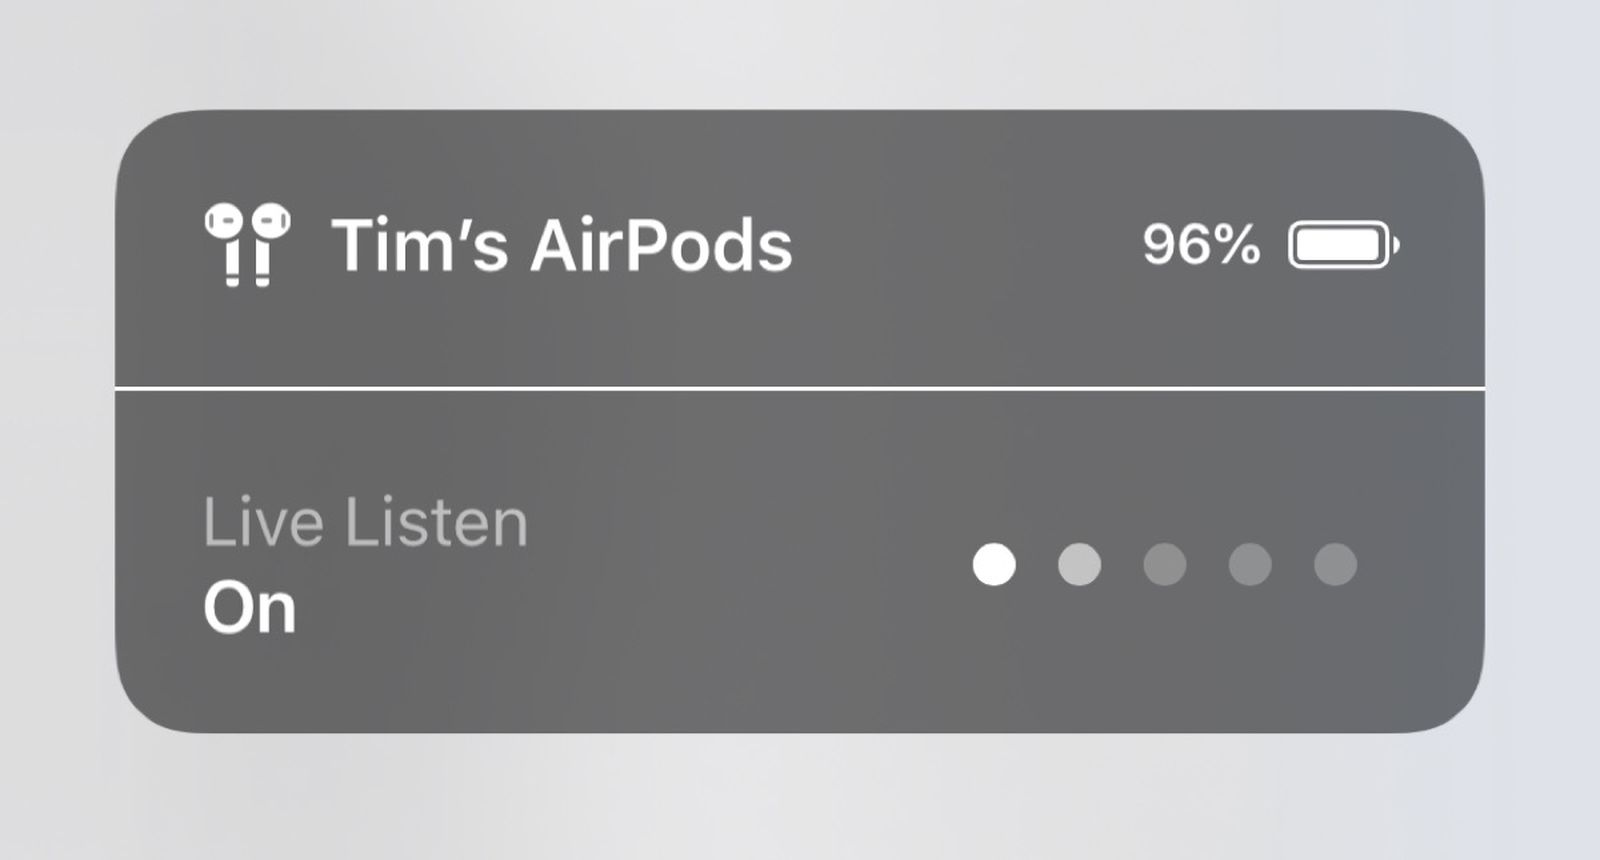 despise length pinch How to Use Apple's Live Listen Feature With AirPods - MacRumors